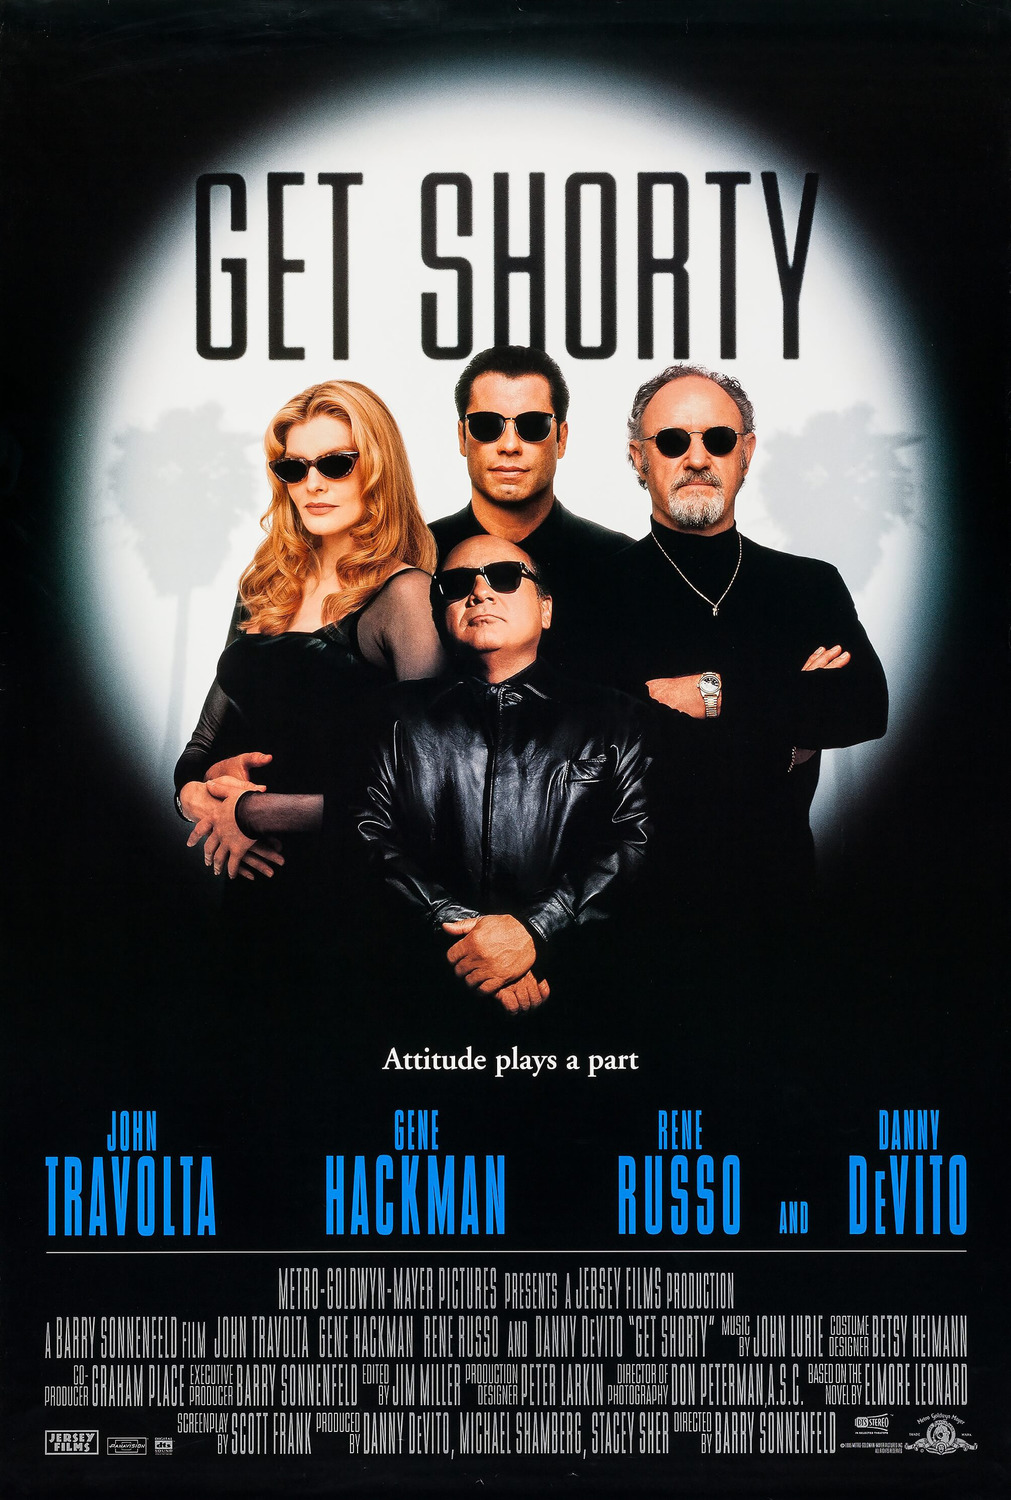 Extra Large Movie Poster Image for Get Shorty 